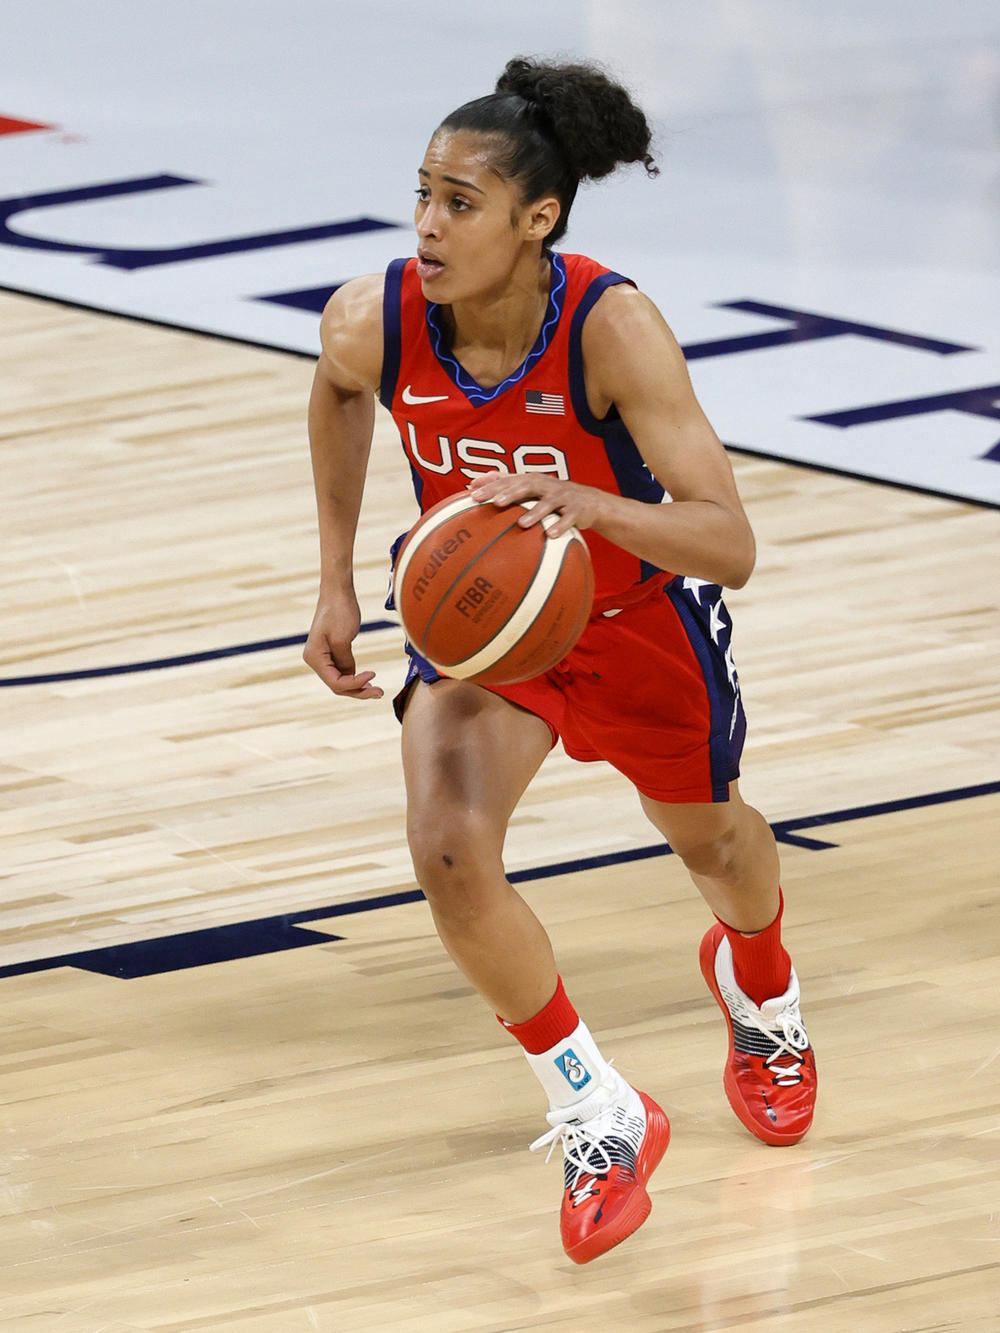 Skylar Diggins-Smith of the United States brings the ball up the court during a pre-Olympics exhibition match earlier this month against Australia in Las Vegas, Nev.